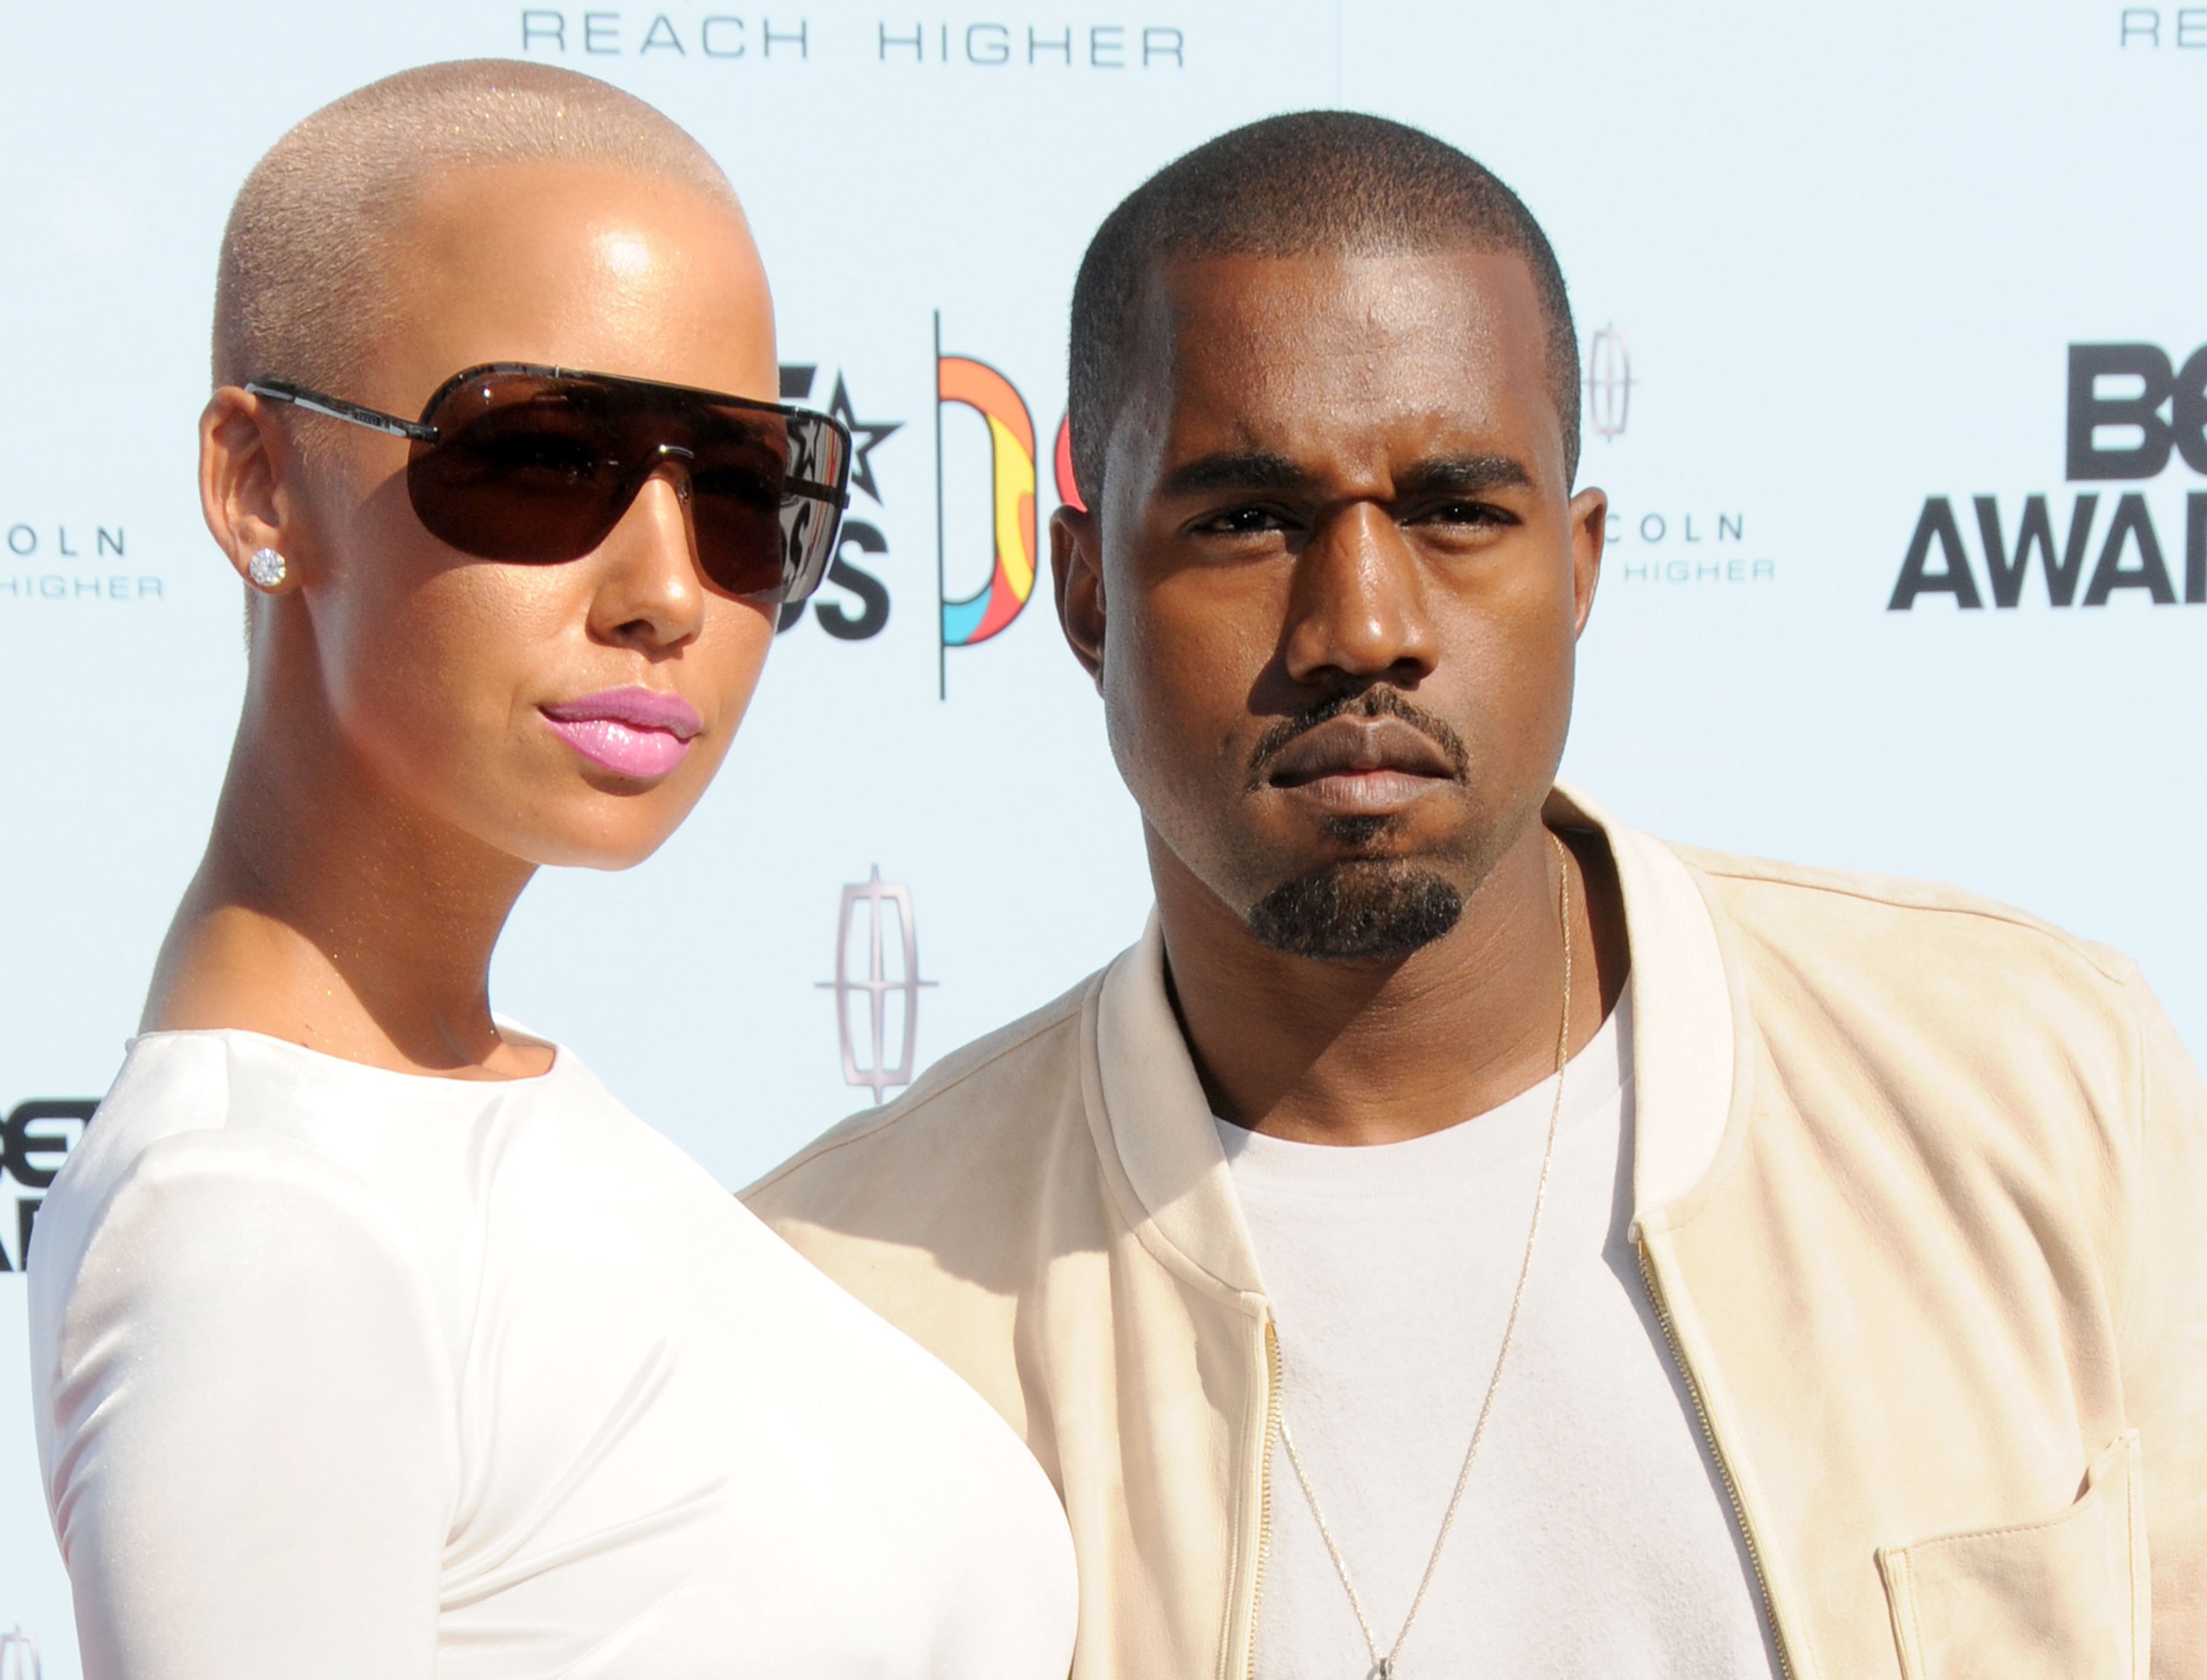 Amber Rose and Kanye West at the 2009 BET Awards in Los Angeles, California. | Source: Getty Images